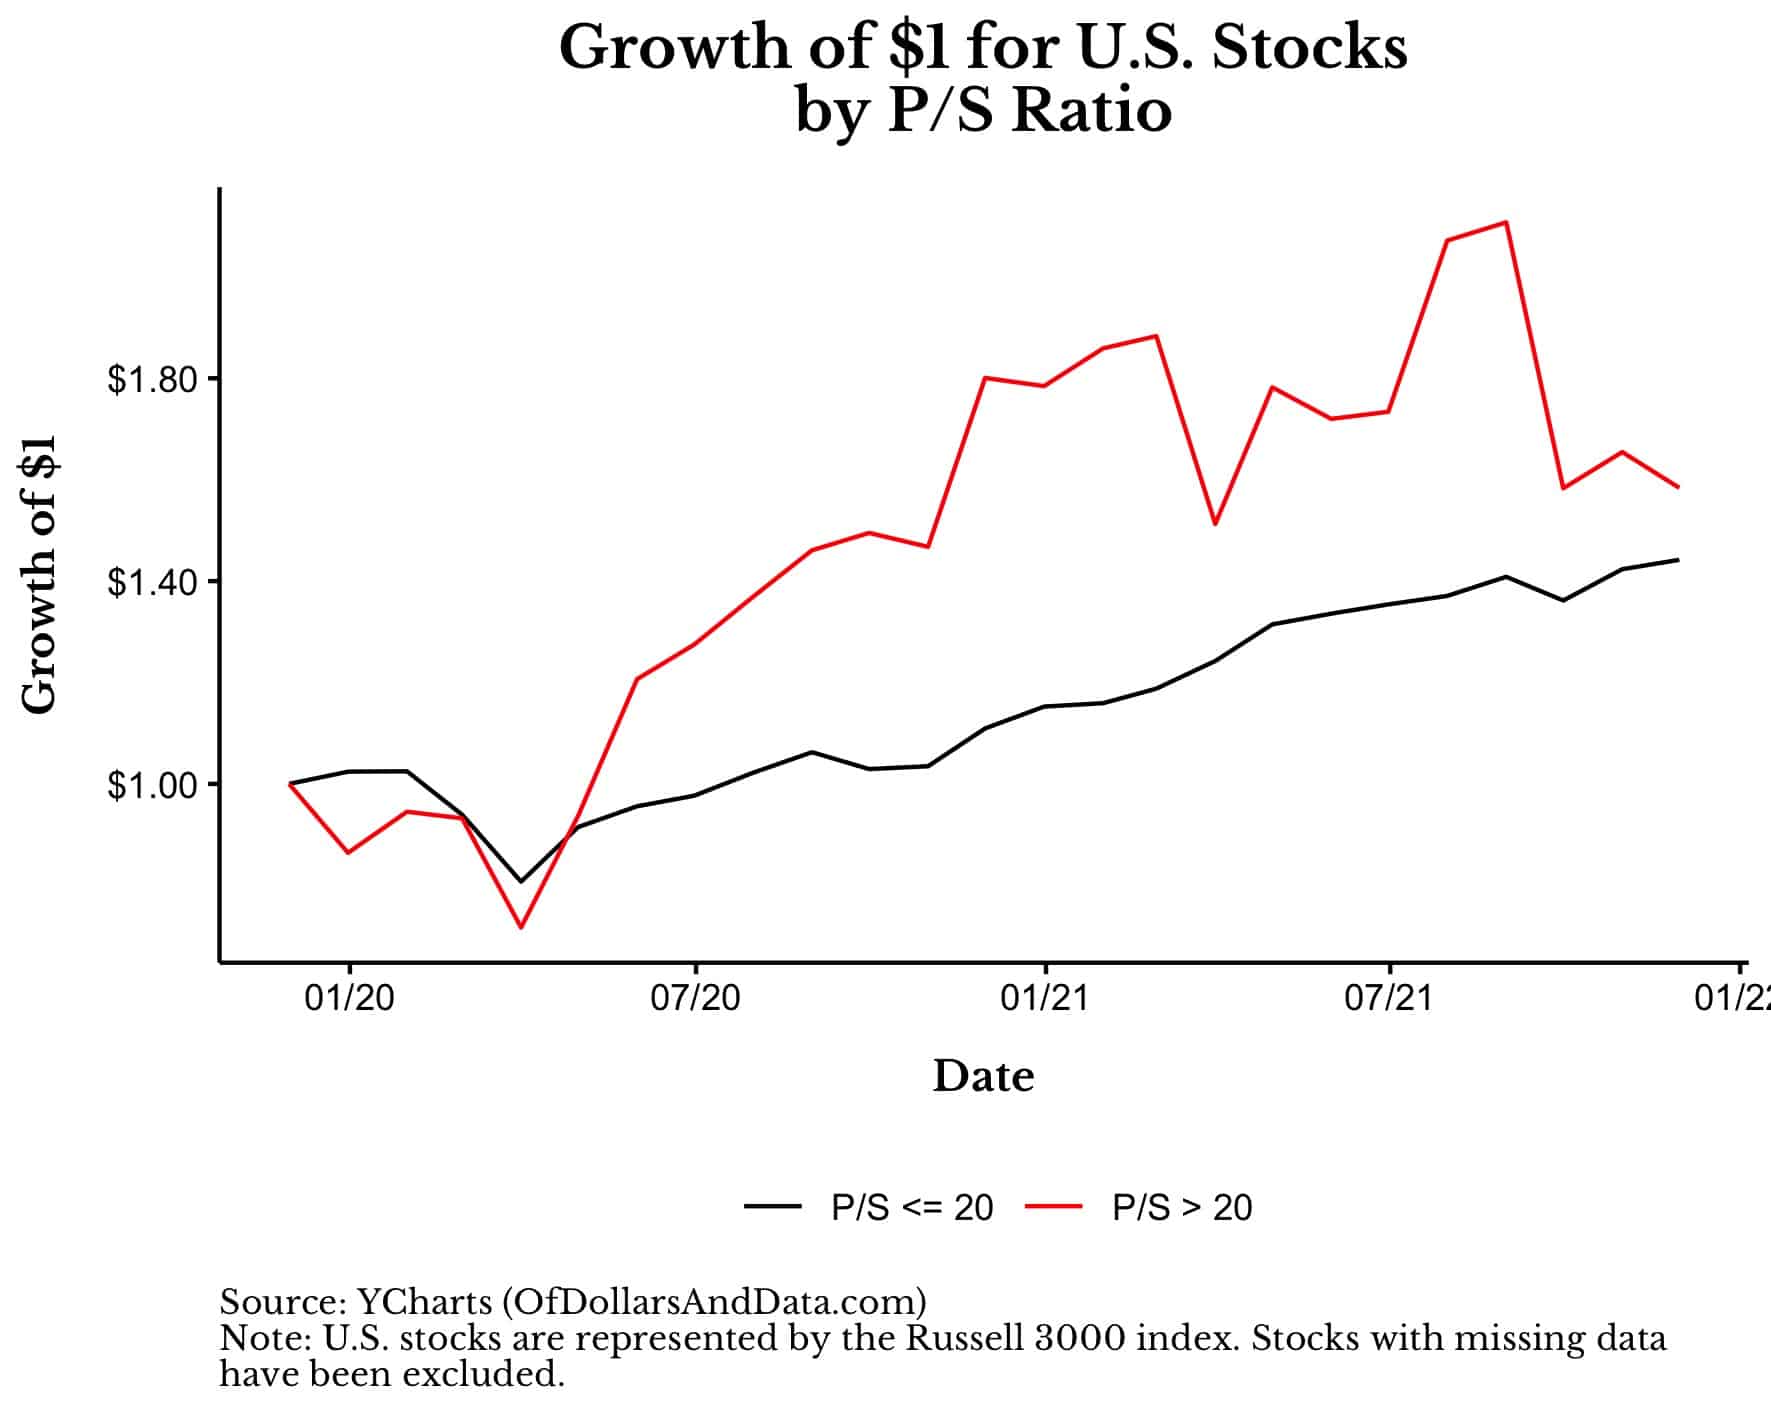 Growth of $1 for U.S. stocks by P/S ratio grouping, 2020-2021